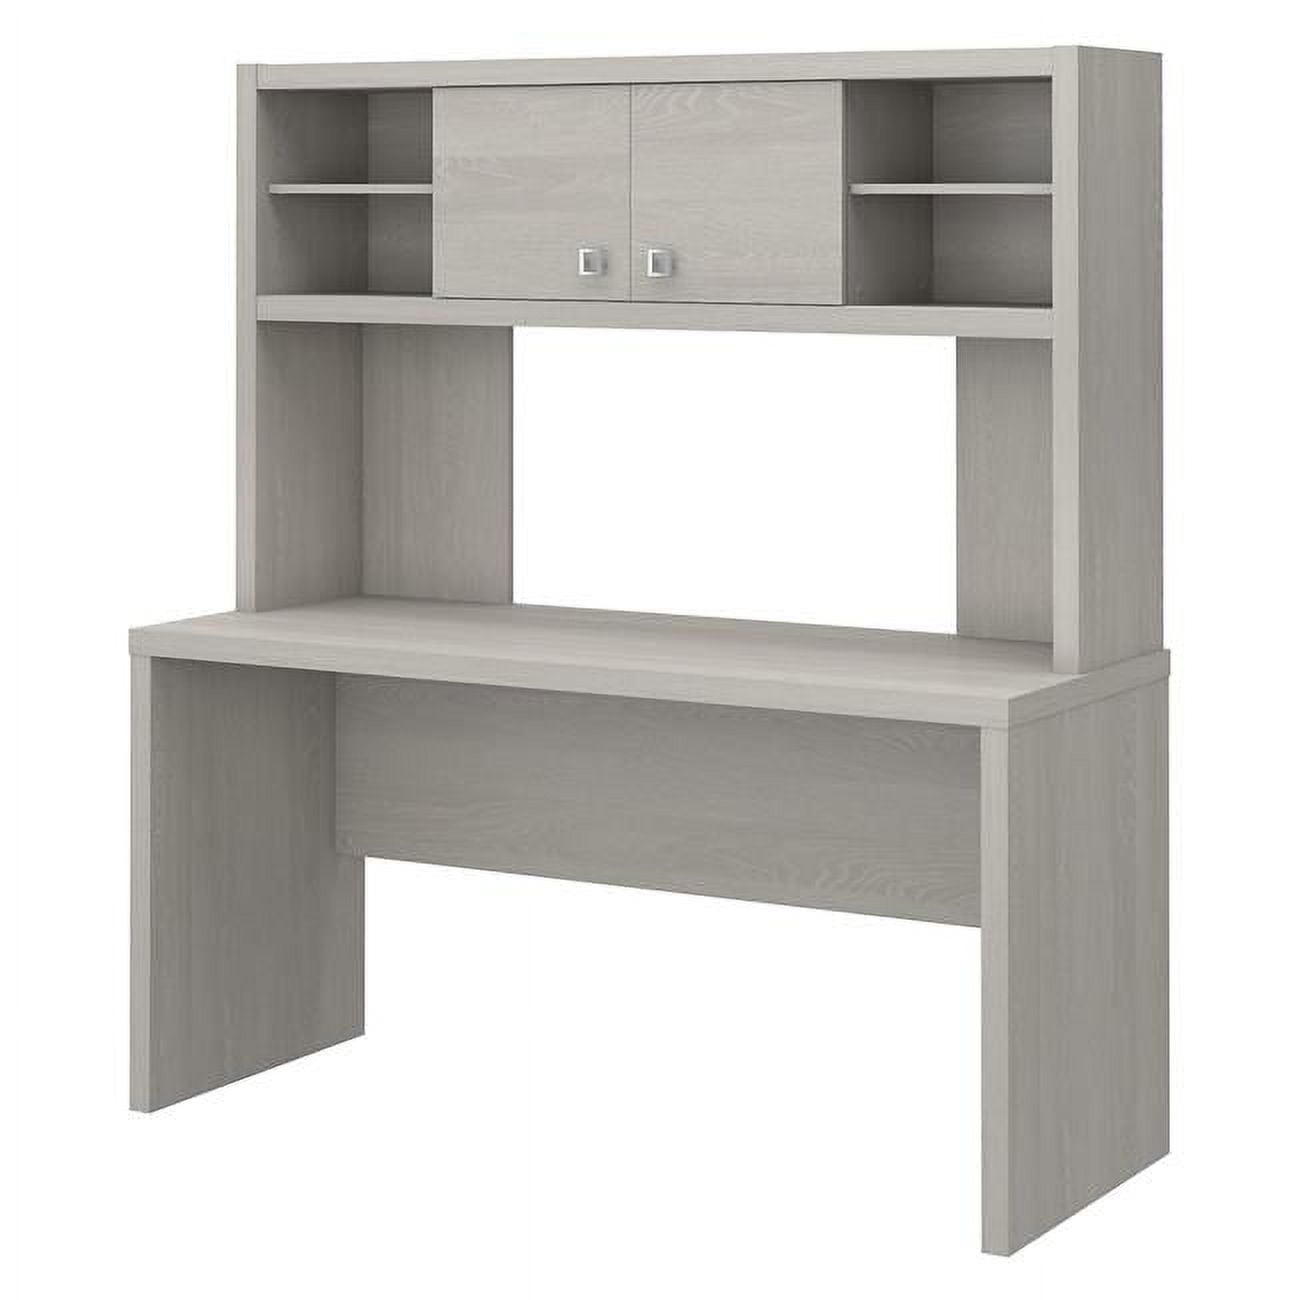 Picture of Bush Business Furniture ECH030GS 60 in. Kathy Ireland Echo Credenza Desk with Hutch - Gray Sand